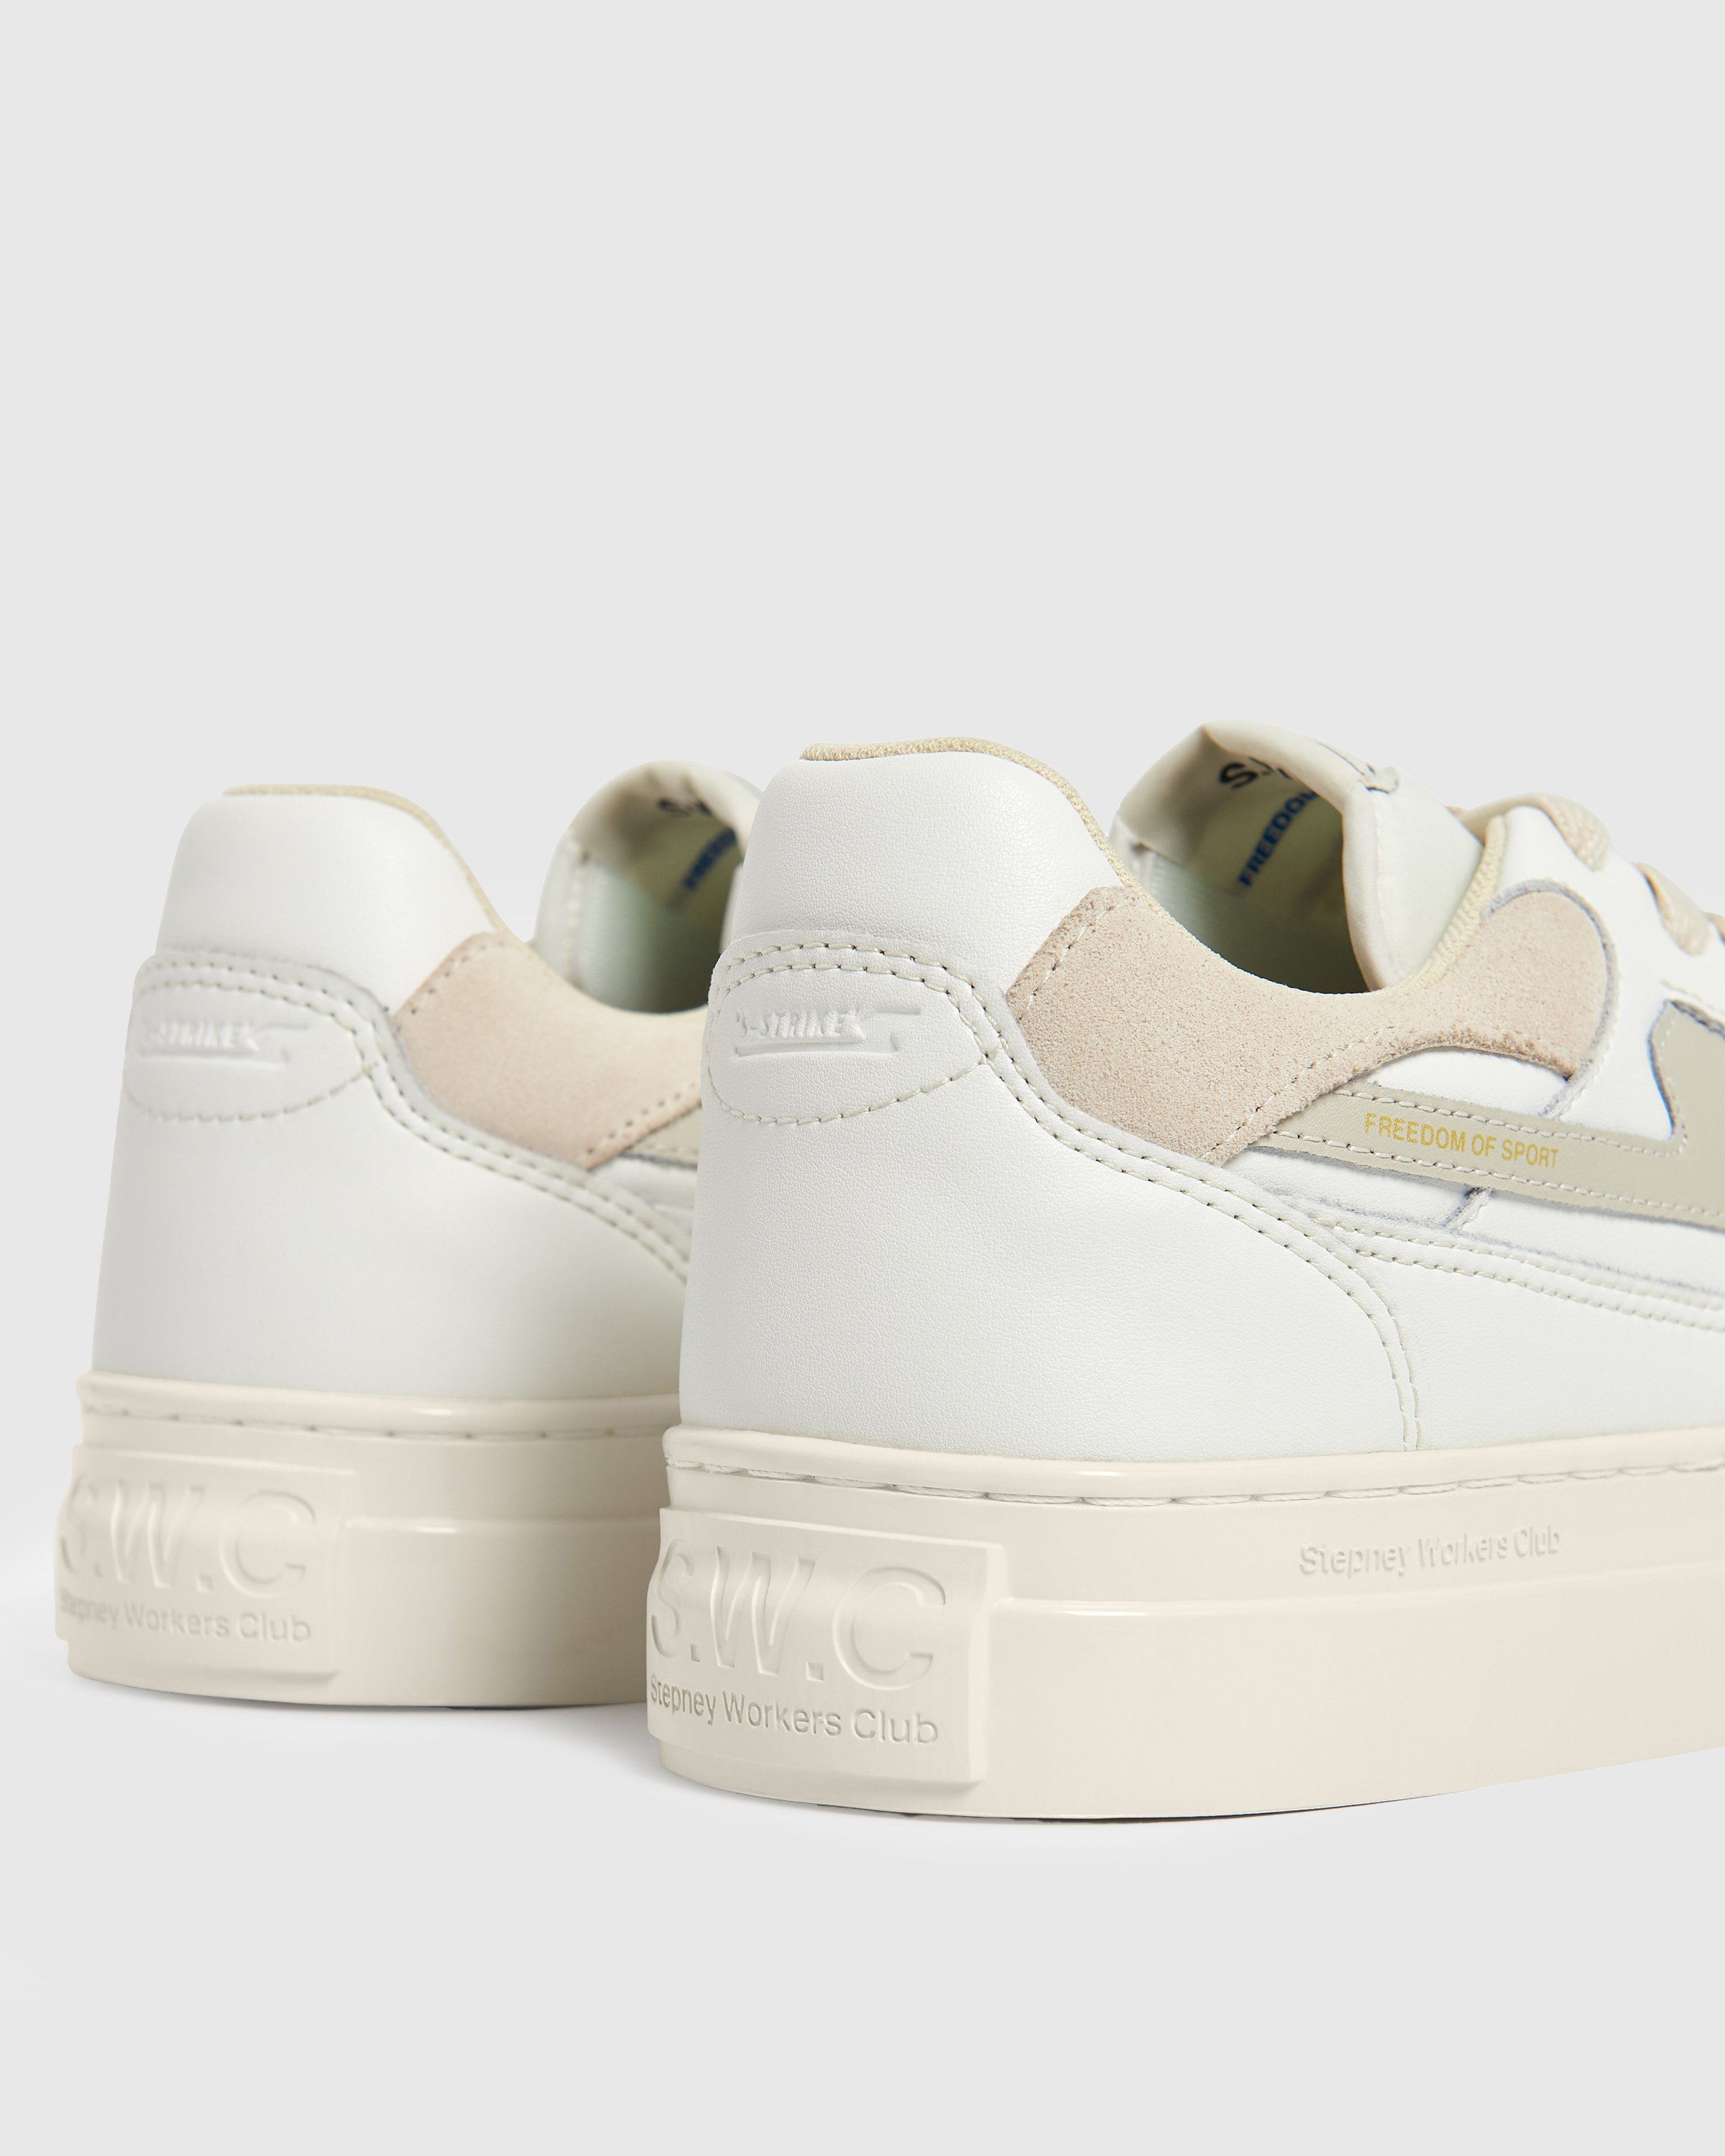 Stepney Workers Club - Pearl S-Strike Leather White - Footwear - White - Image 3